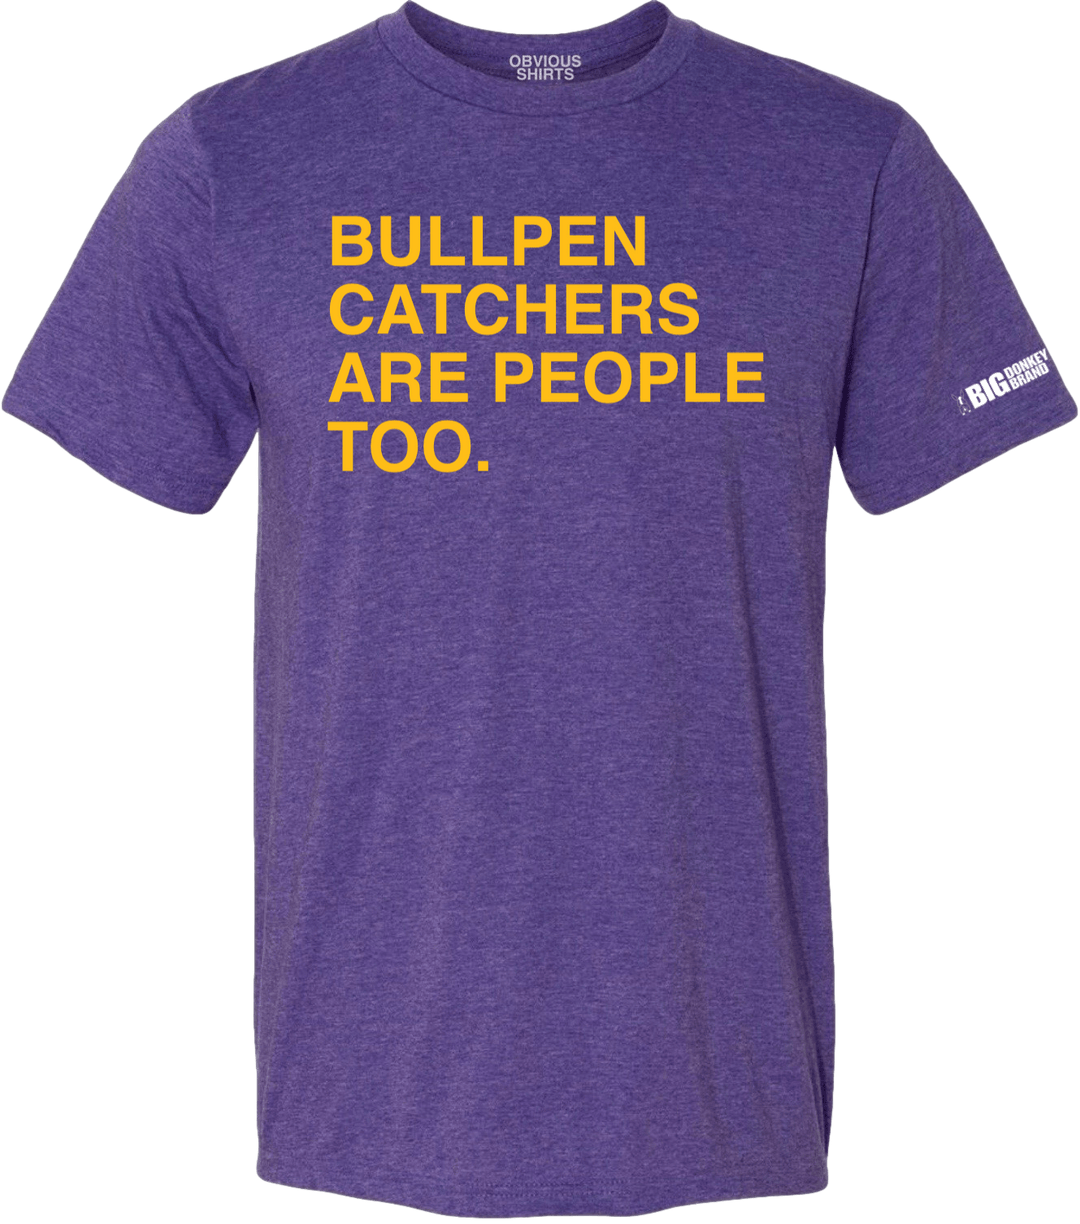 BULLPEN CATCHERS ARE PEOPLE TOO. (CUSTOMIZE) - OBVIOUS SHIRTS